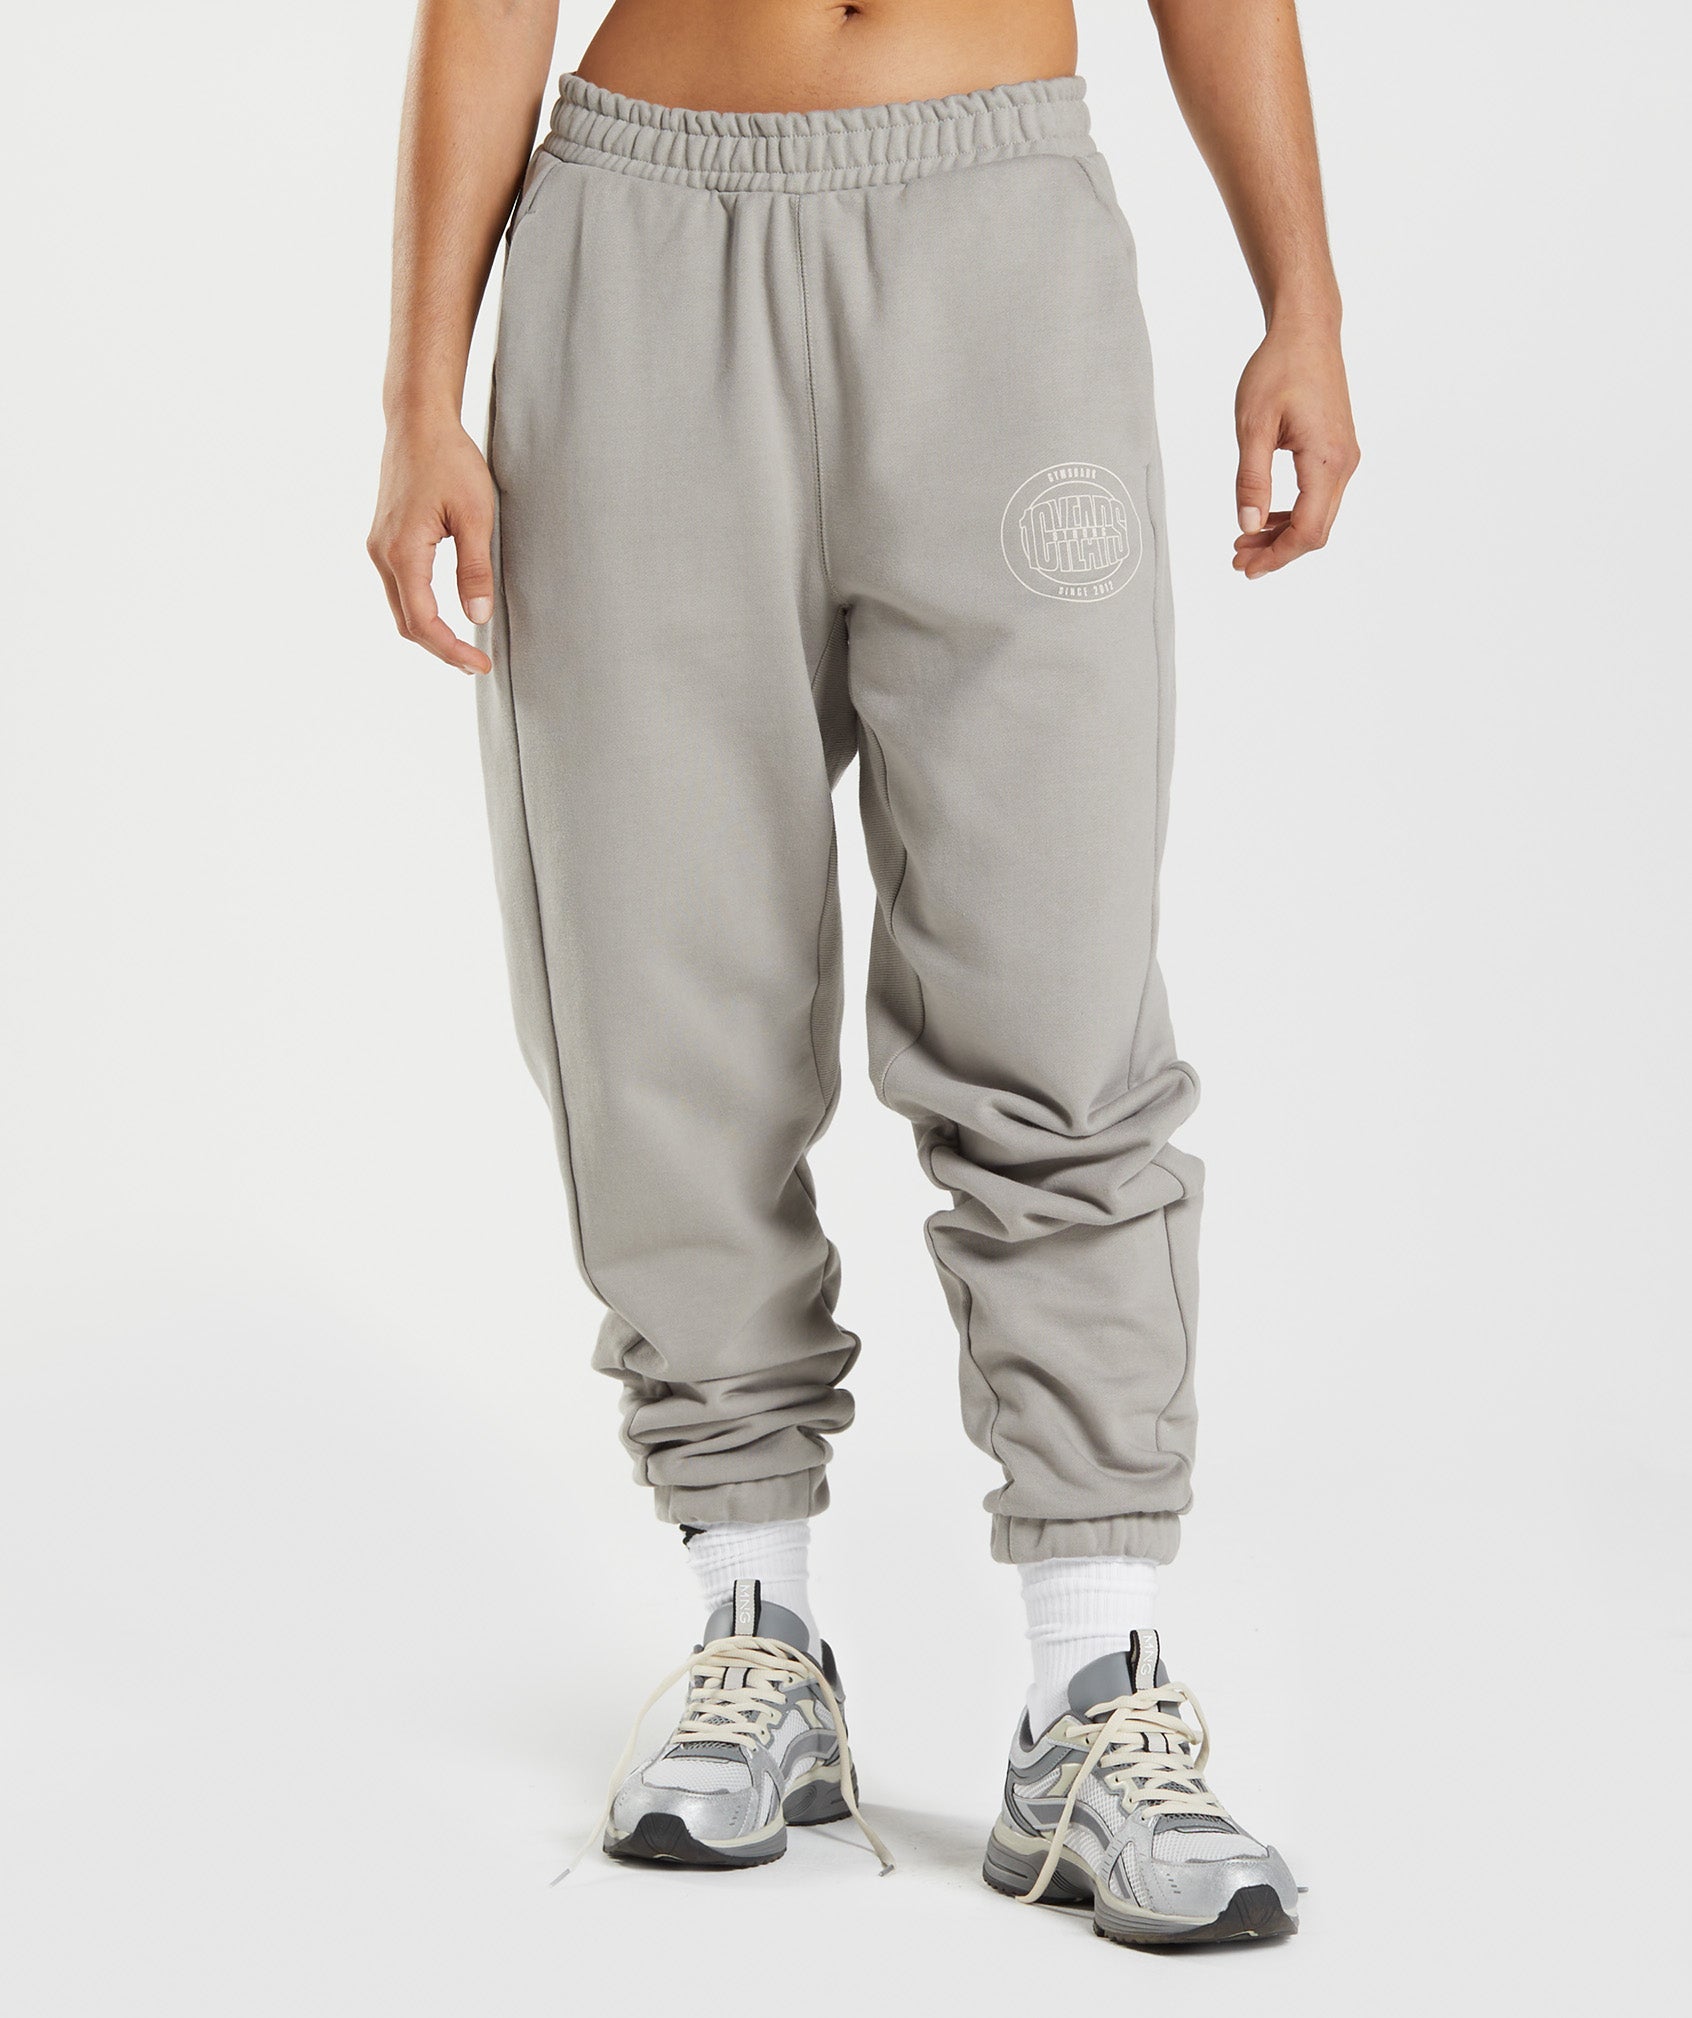 GS10 Year Joggers in Ecru Brown - view 1